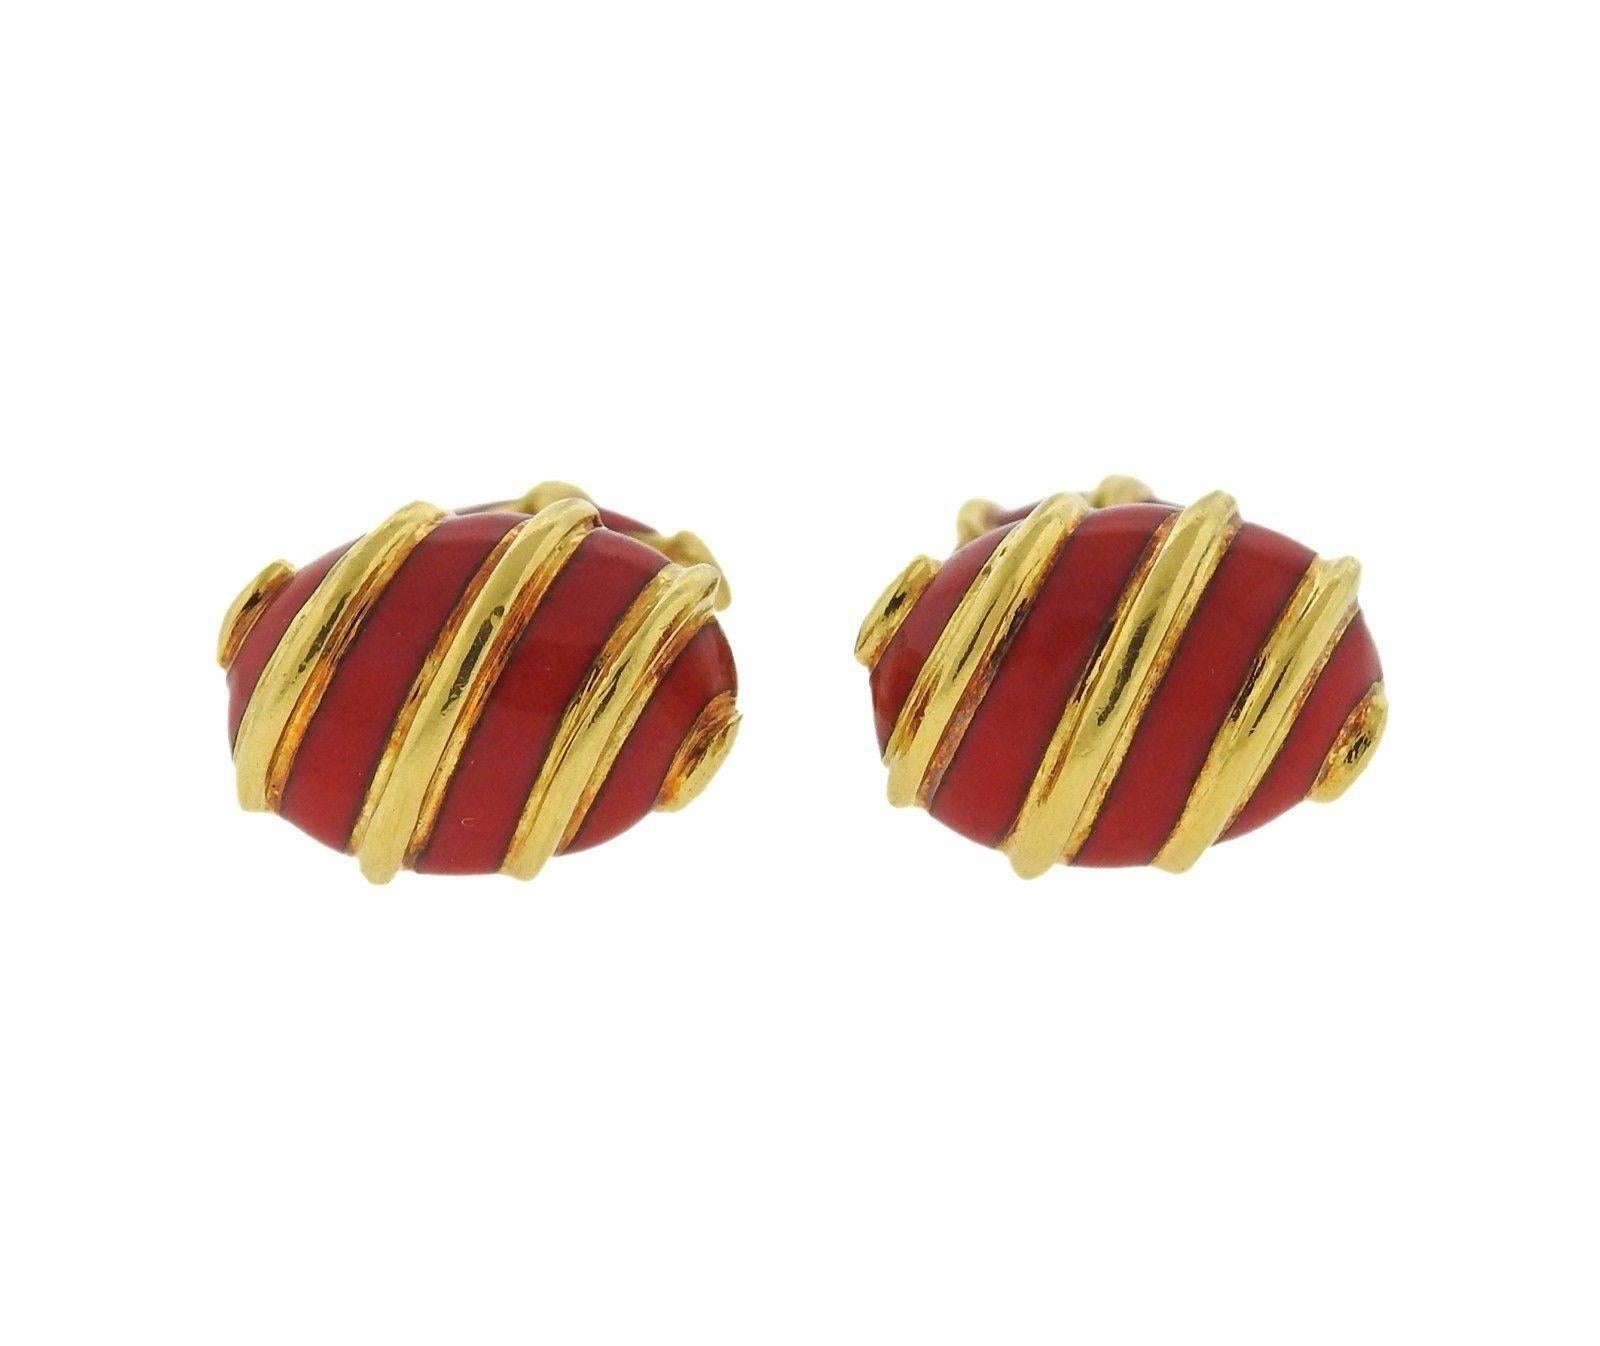 18k Gold Red Enamel Cufflinks. Cufflink tops measure 15mm x 10mm and 12mm X 7mm. Cufflinks tested 18k and weigh 15.1 grams. 